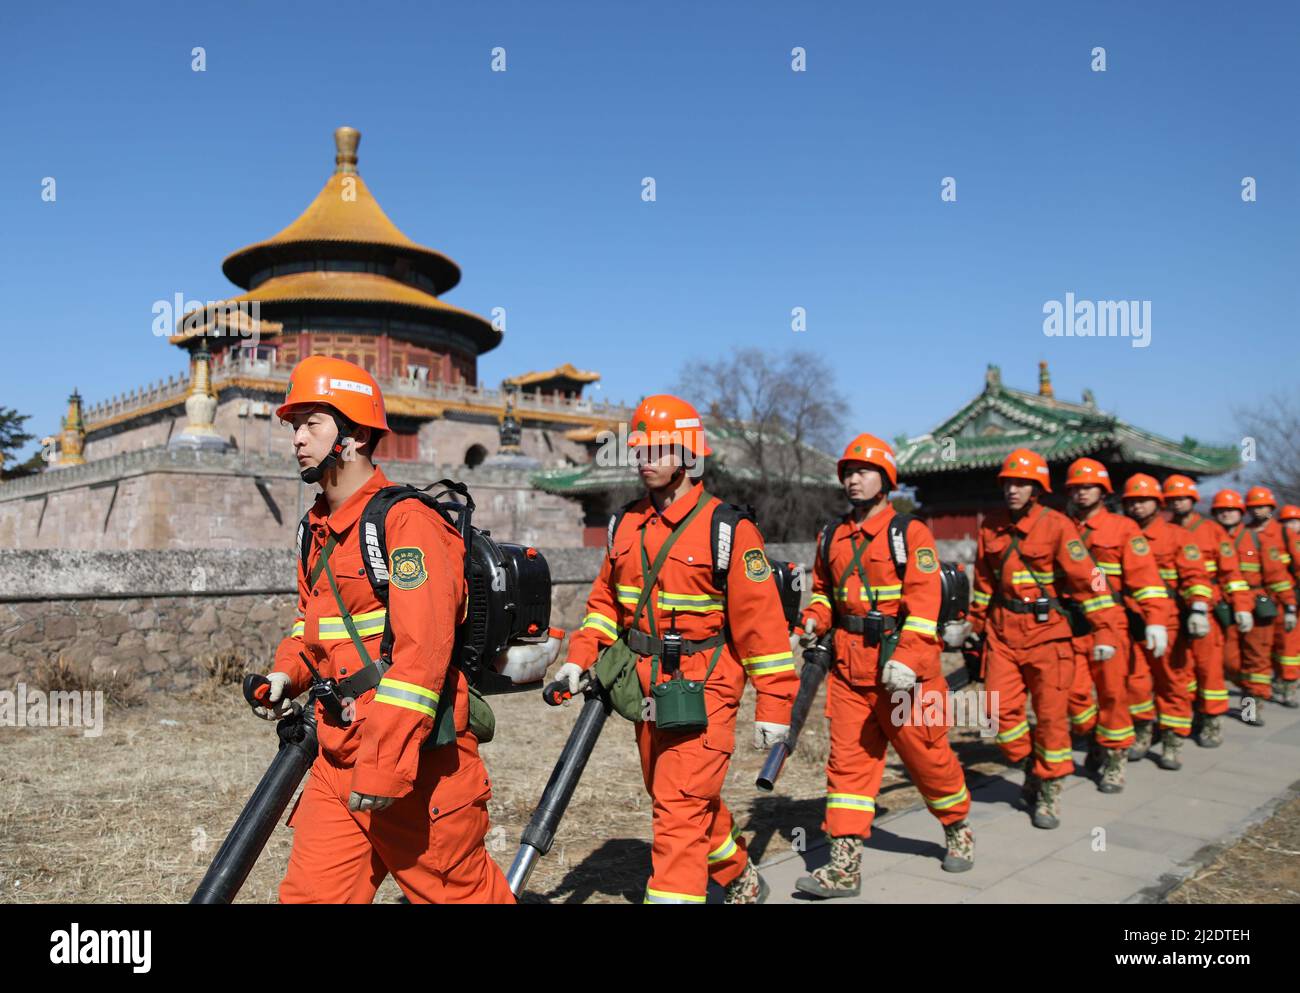 CHENGDE, CHINA - APRIL 1, 2022 - Firefighters inspect a mountain resort and its surrounding temple in Chengde City, North China's Hebei Province, Apri Stock Photo